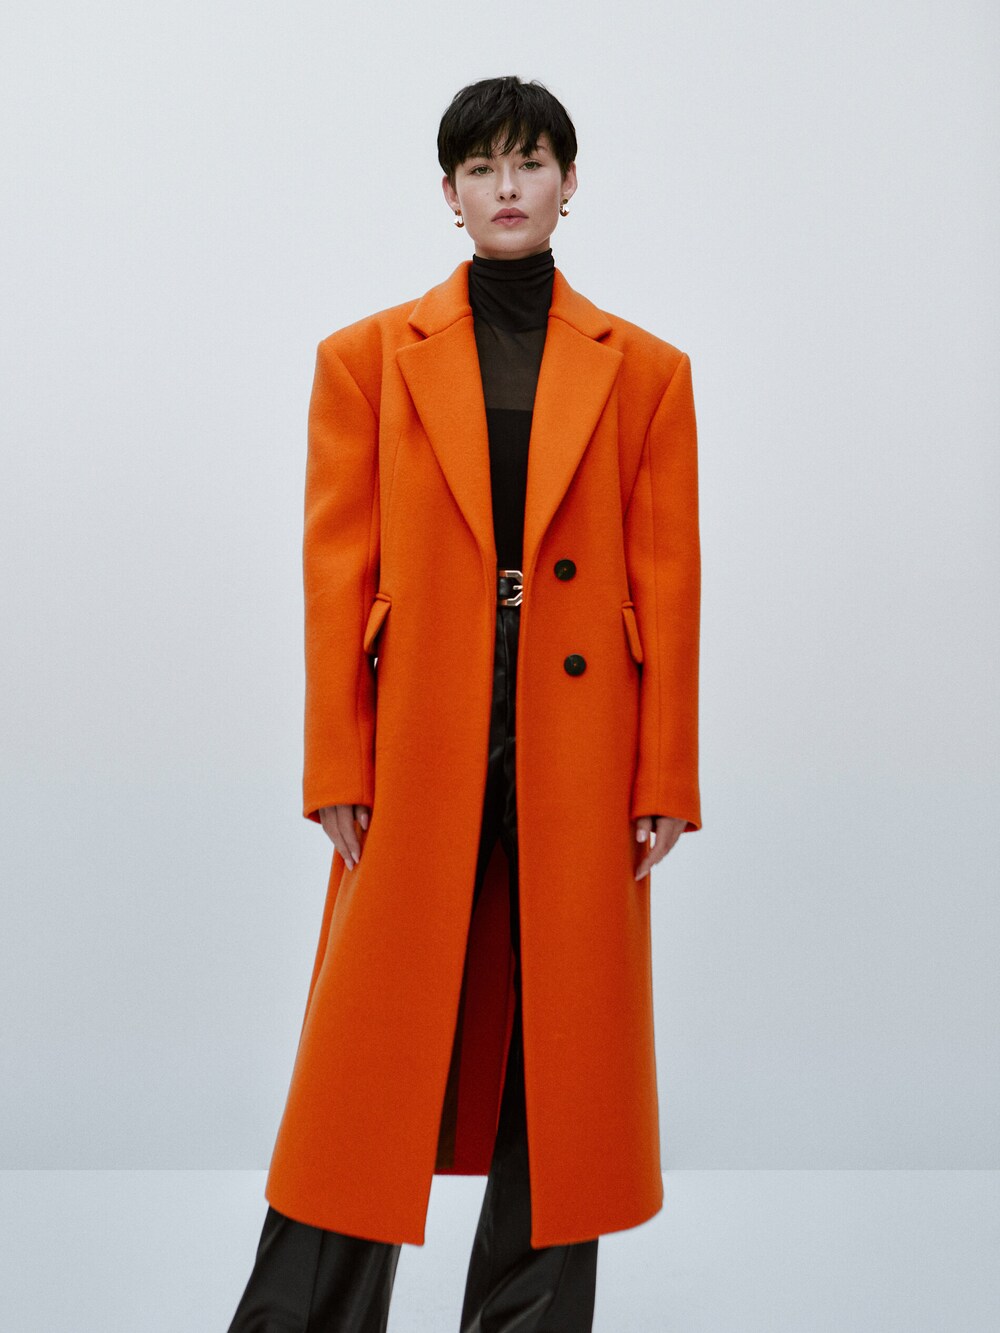 This Massimo Dutti orange long wool coat, is a reinvention of the classic overcoat in a dopamine inducing bright colour that will brighten all your autumn/winter days. It has a Button fastening, Two flap pockets, a Back vent and is Lined.